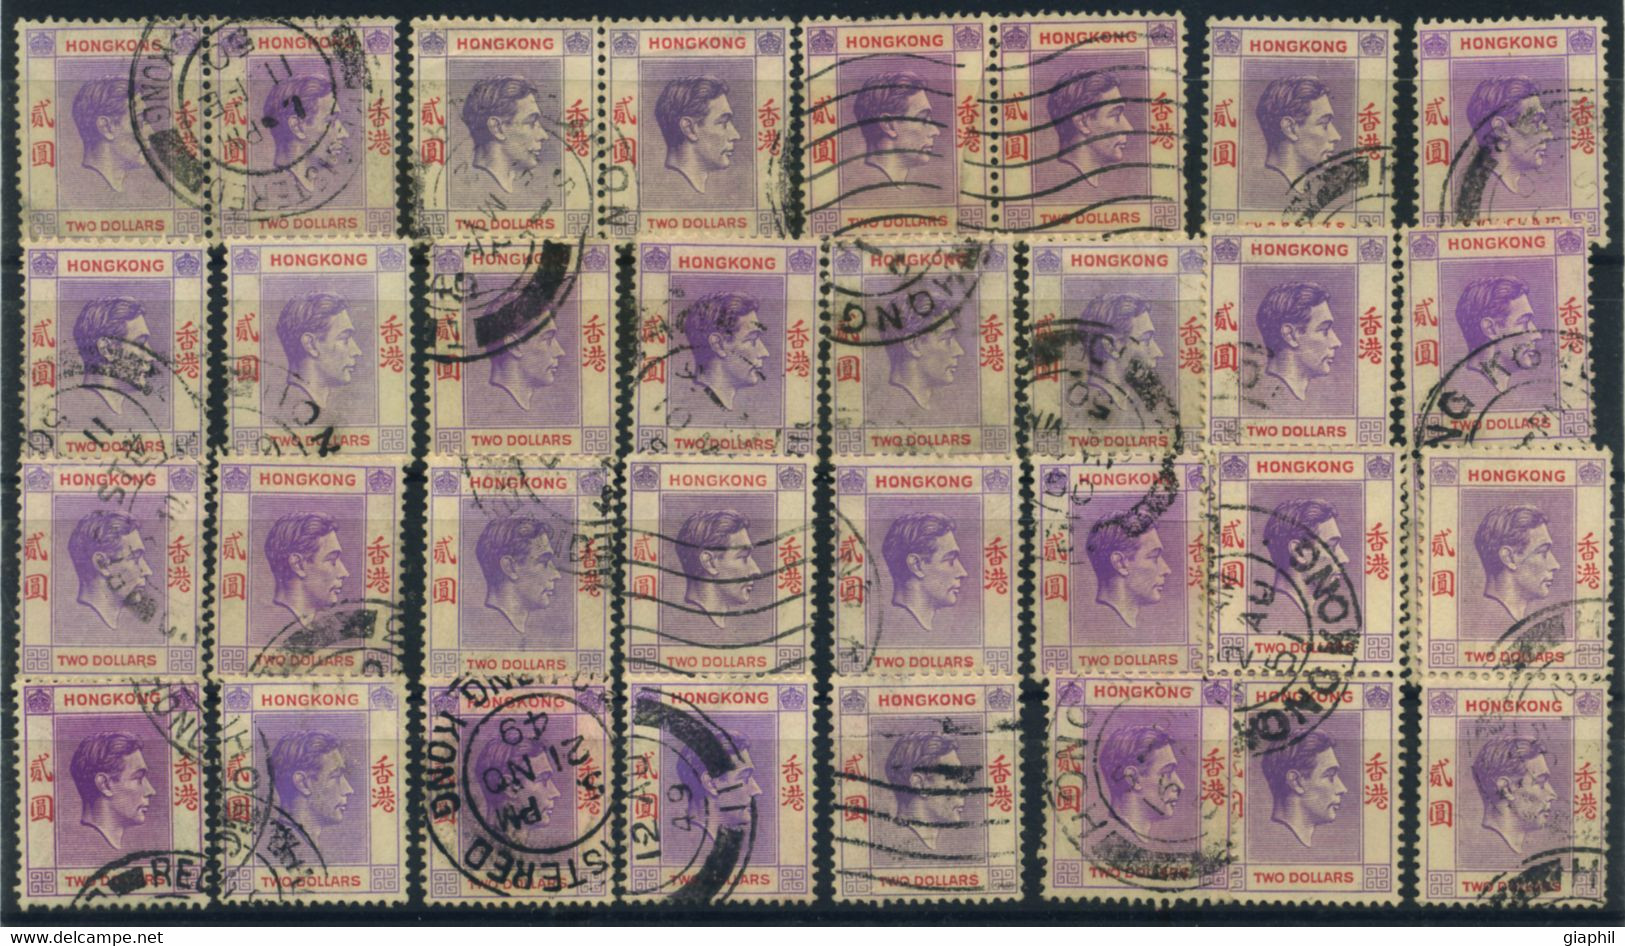 HONG KONG 1938-52 2 $ (SG 160) 32 USED EXAMPLES OFFER! - Usati